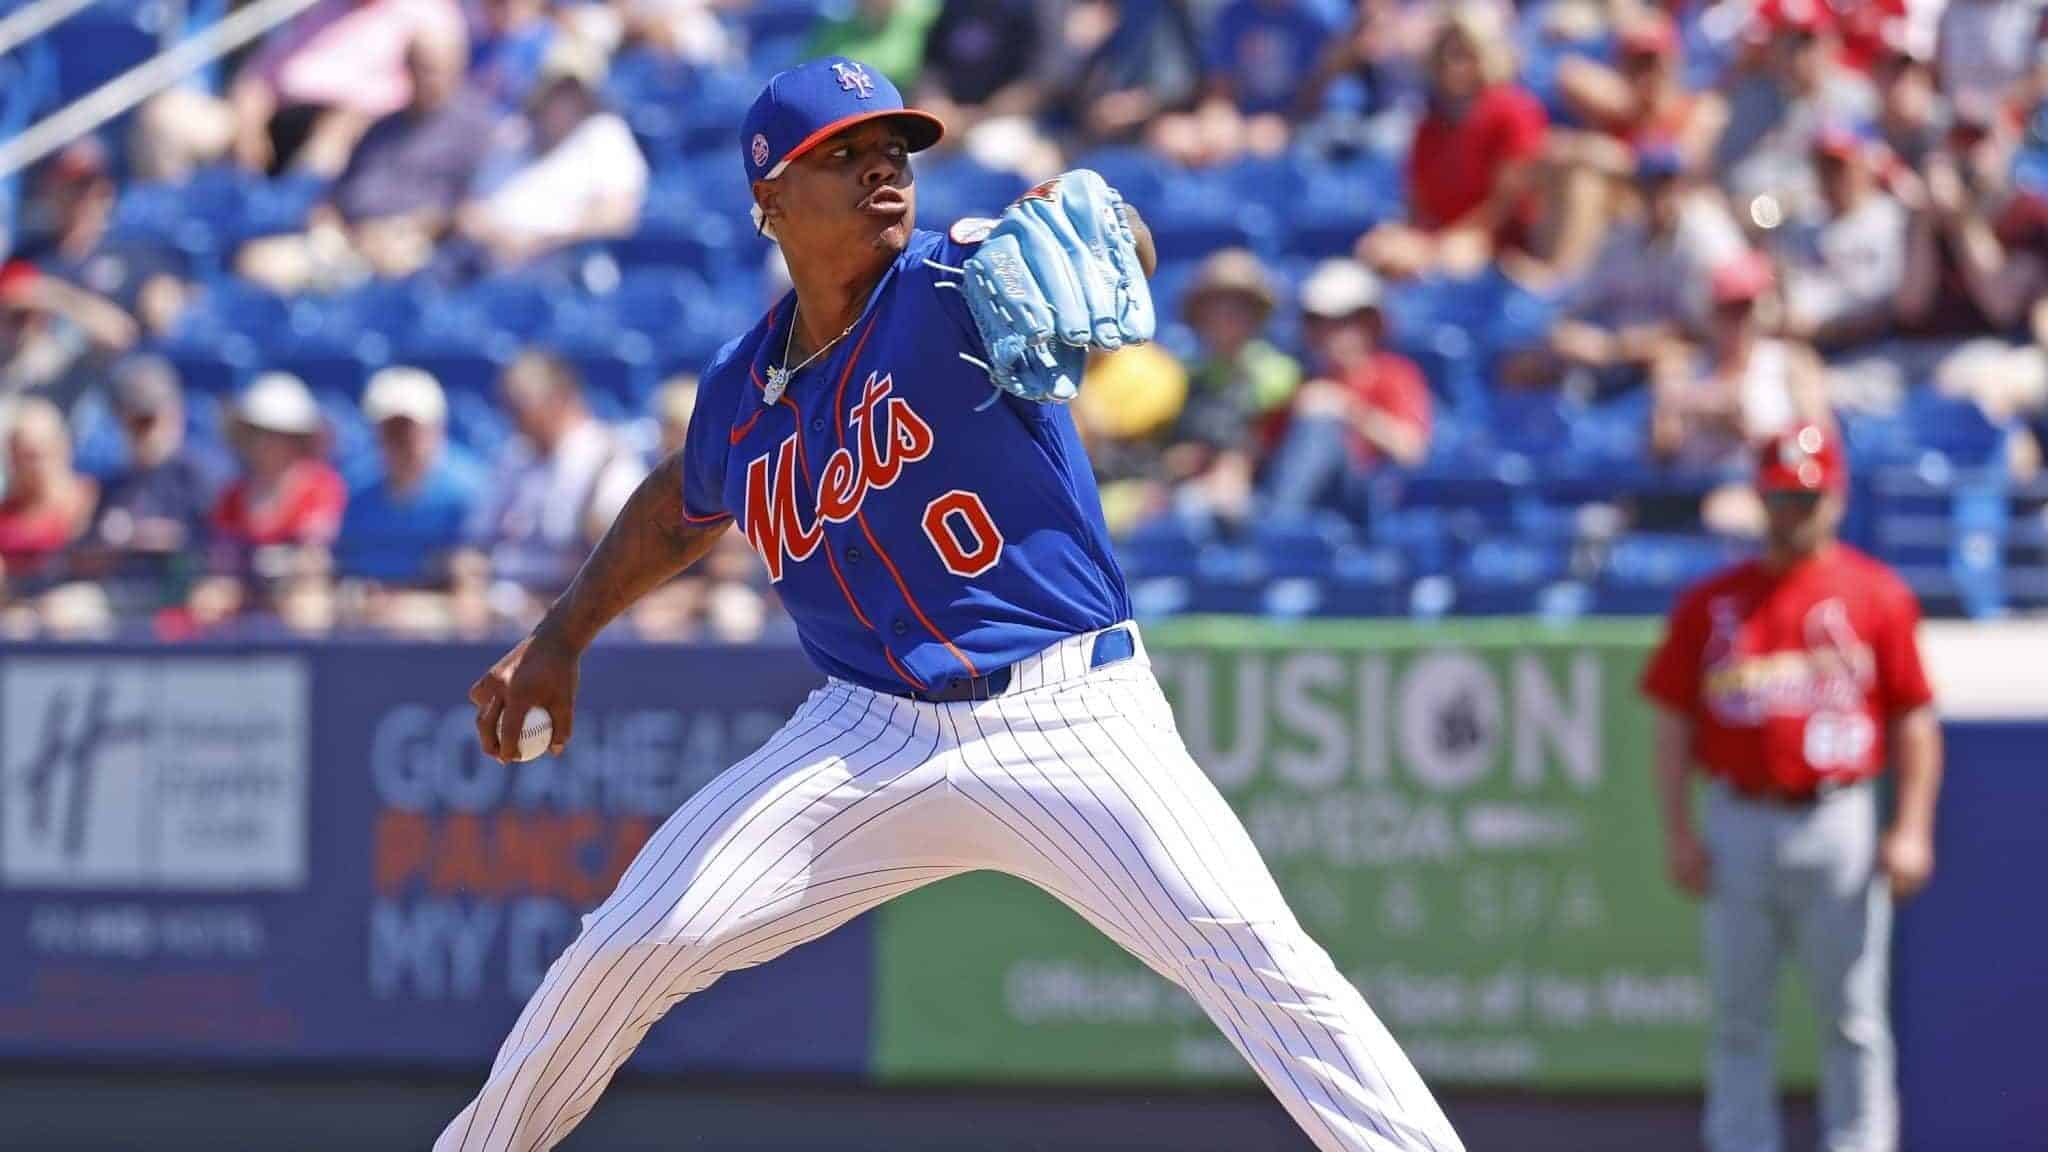 PORT ST LUCIE, FL - MARCH 4: Marcus Stroman #0 of the New York Mets throws the ball against the St Louis Cardinals during a spring training game at Clover Park on March 4, 2020 in Port St. Lucie, Florida.